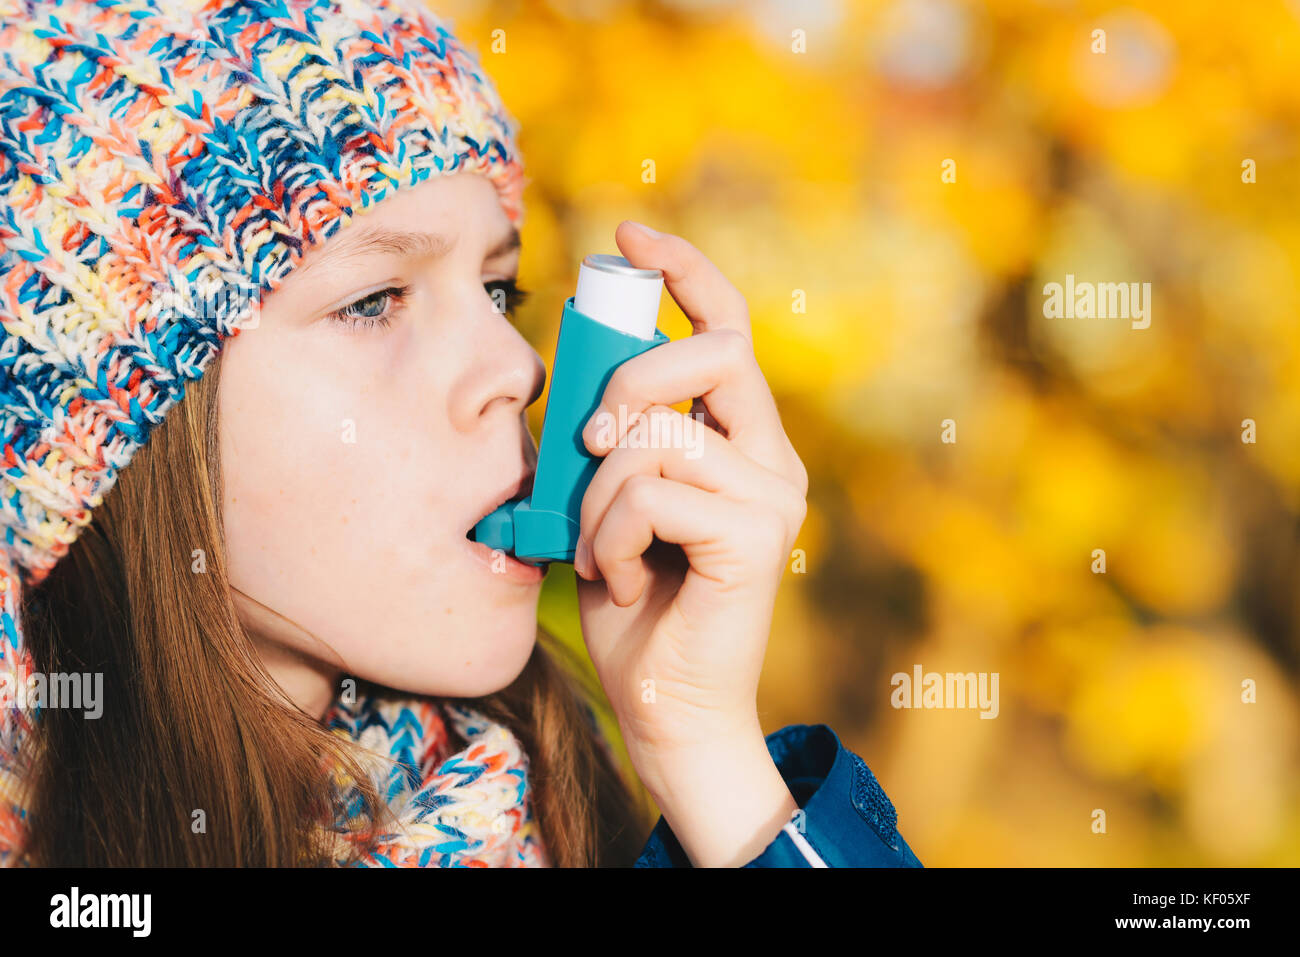 Asthma patient girl inhaling medication for treating shortness of breath and wheezing in a park. Chronic disease control, allergy induced asthma remed Stock Photo